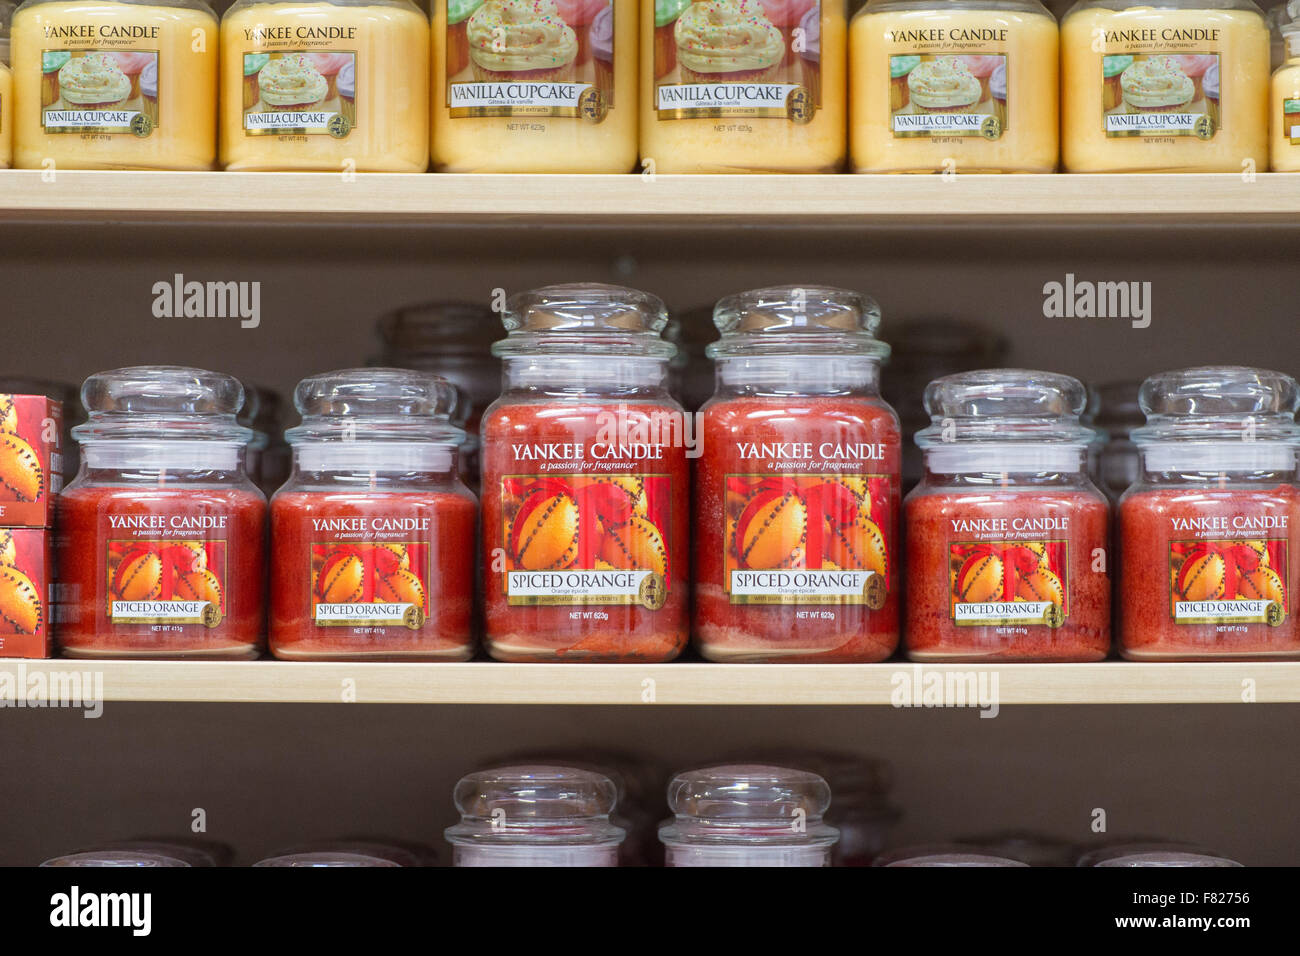 Spiced orange scented candles in a Yankee Candle store. Stock Photo